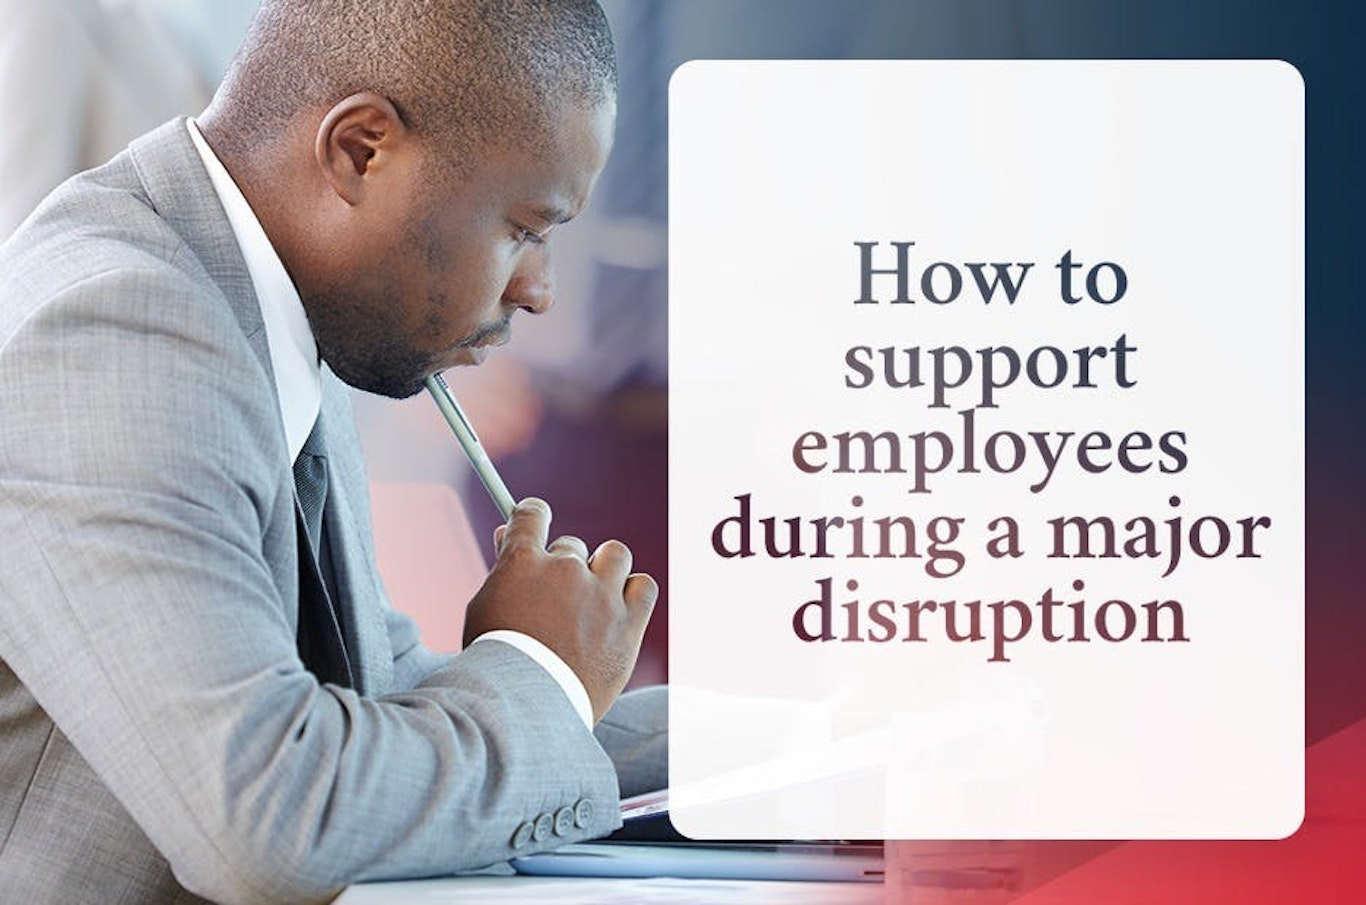 how to support employees during a disruption